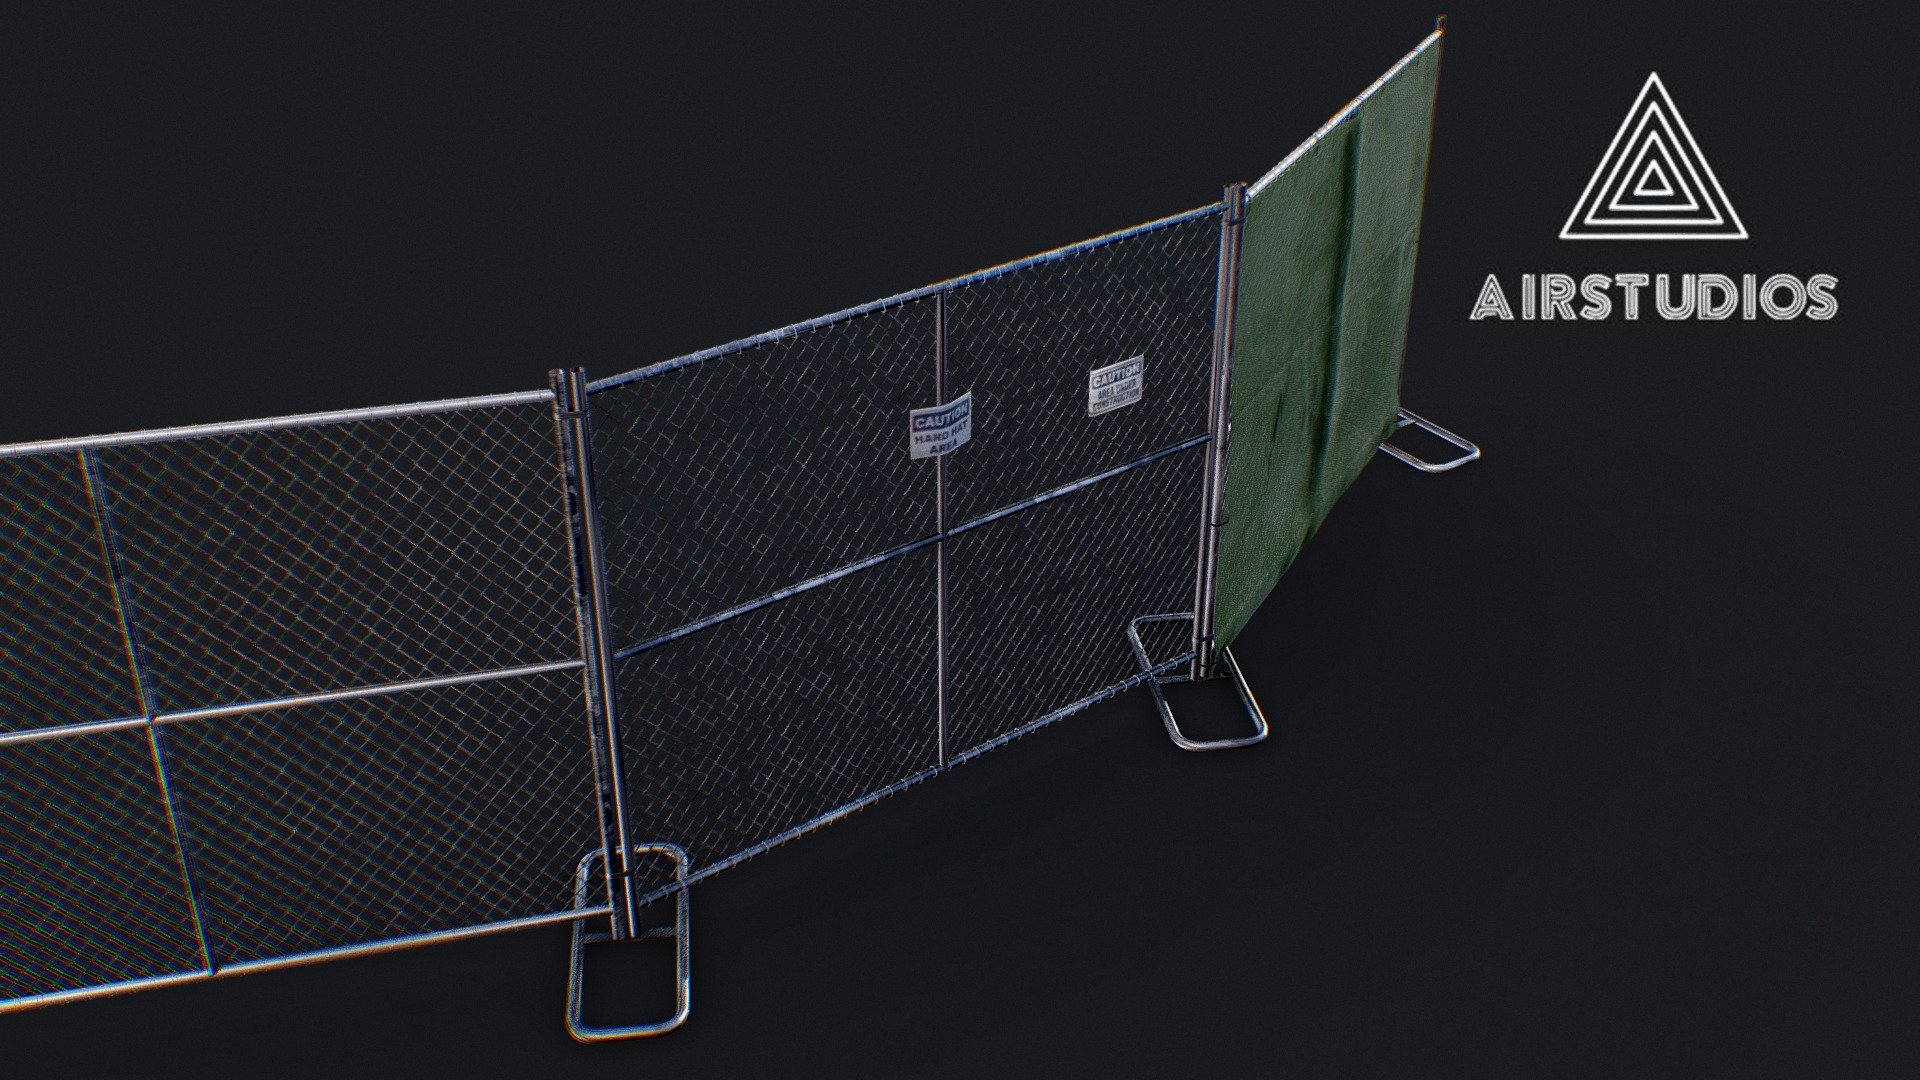 Construction Site Fence

Made in Blender - Construction Site Fence - Buy Royalty Free 3D model by AirStudios (@sebbe613) 3d model